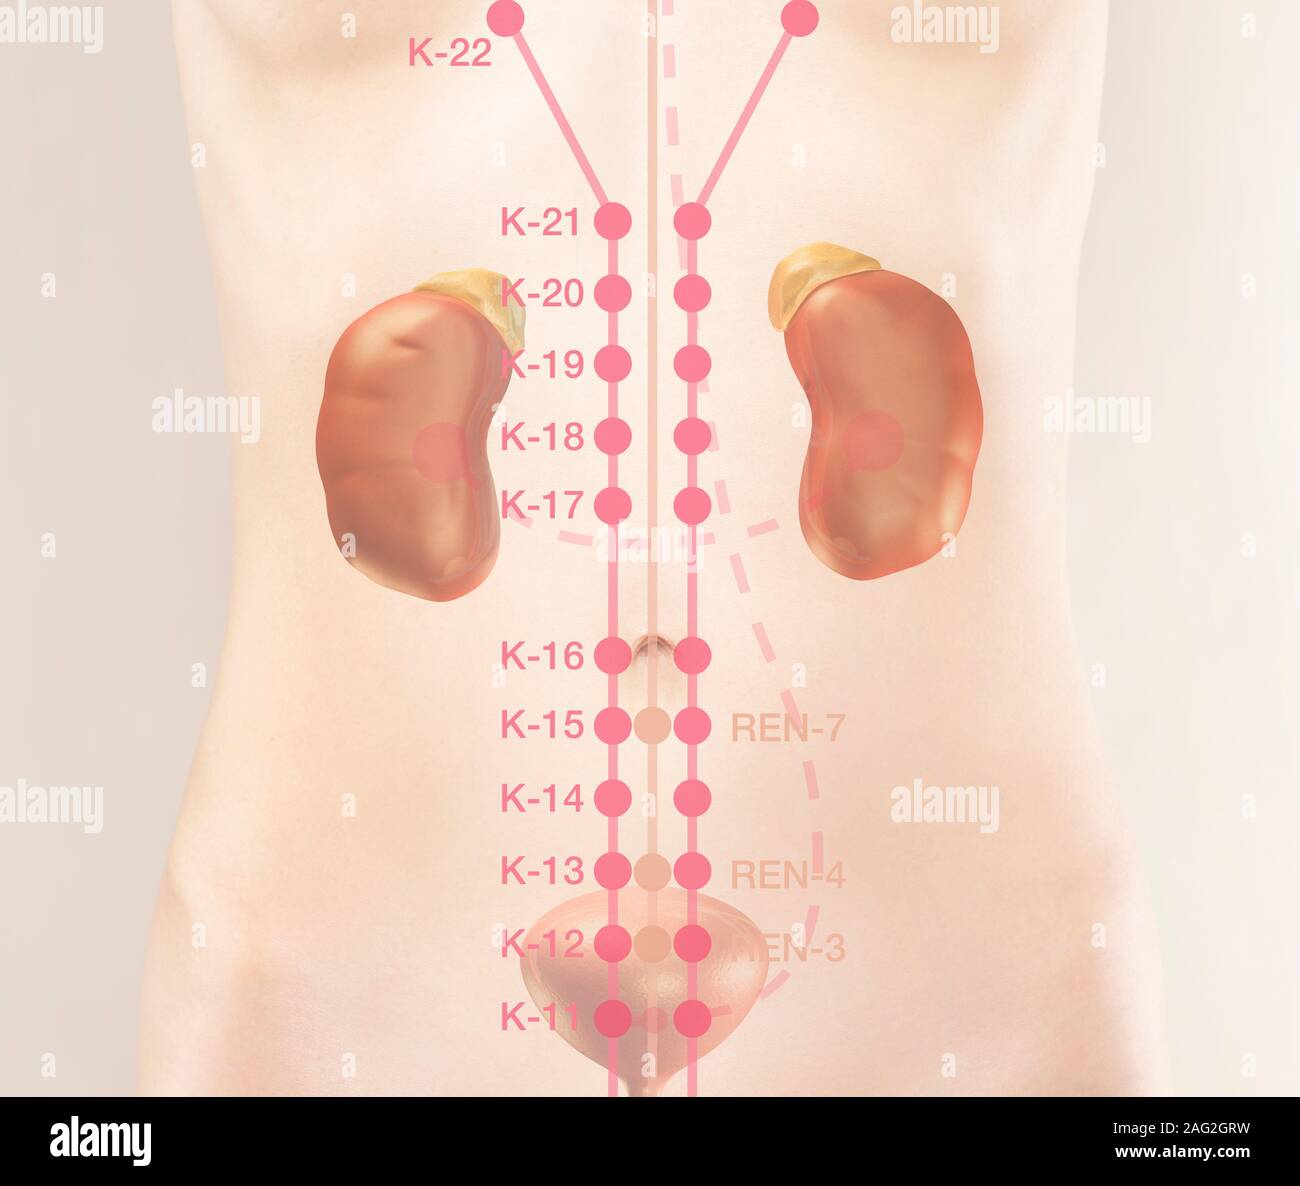 TCM fragment of Kidney channel and meridian points in human body. Traditional Chinese Medicine illustration of acupuncture points, K-11, K-12, K-13, K Stock Photo